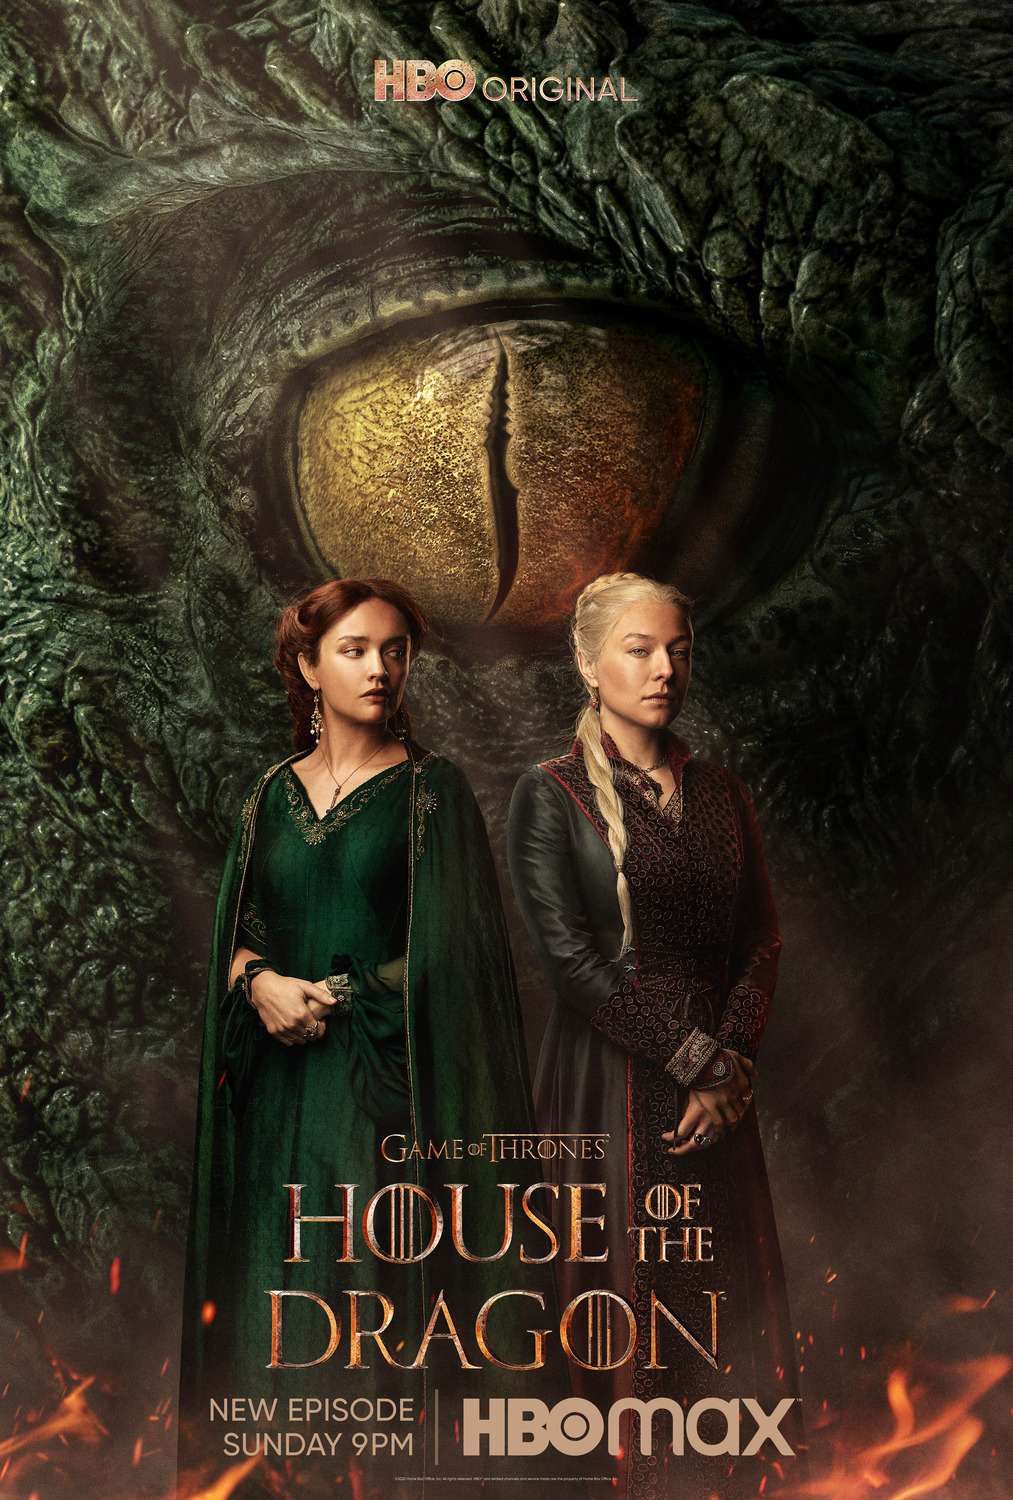 assets/img/movie/House of the Dragon.jpg